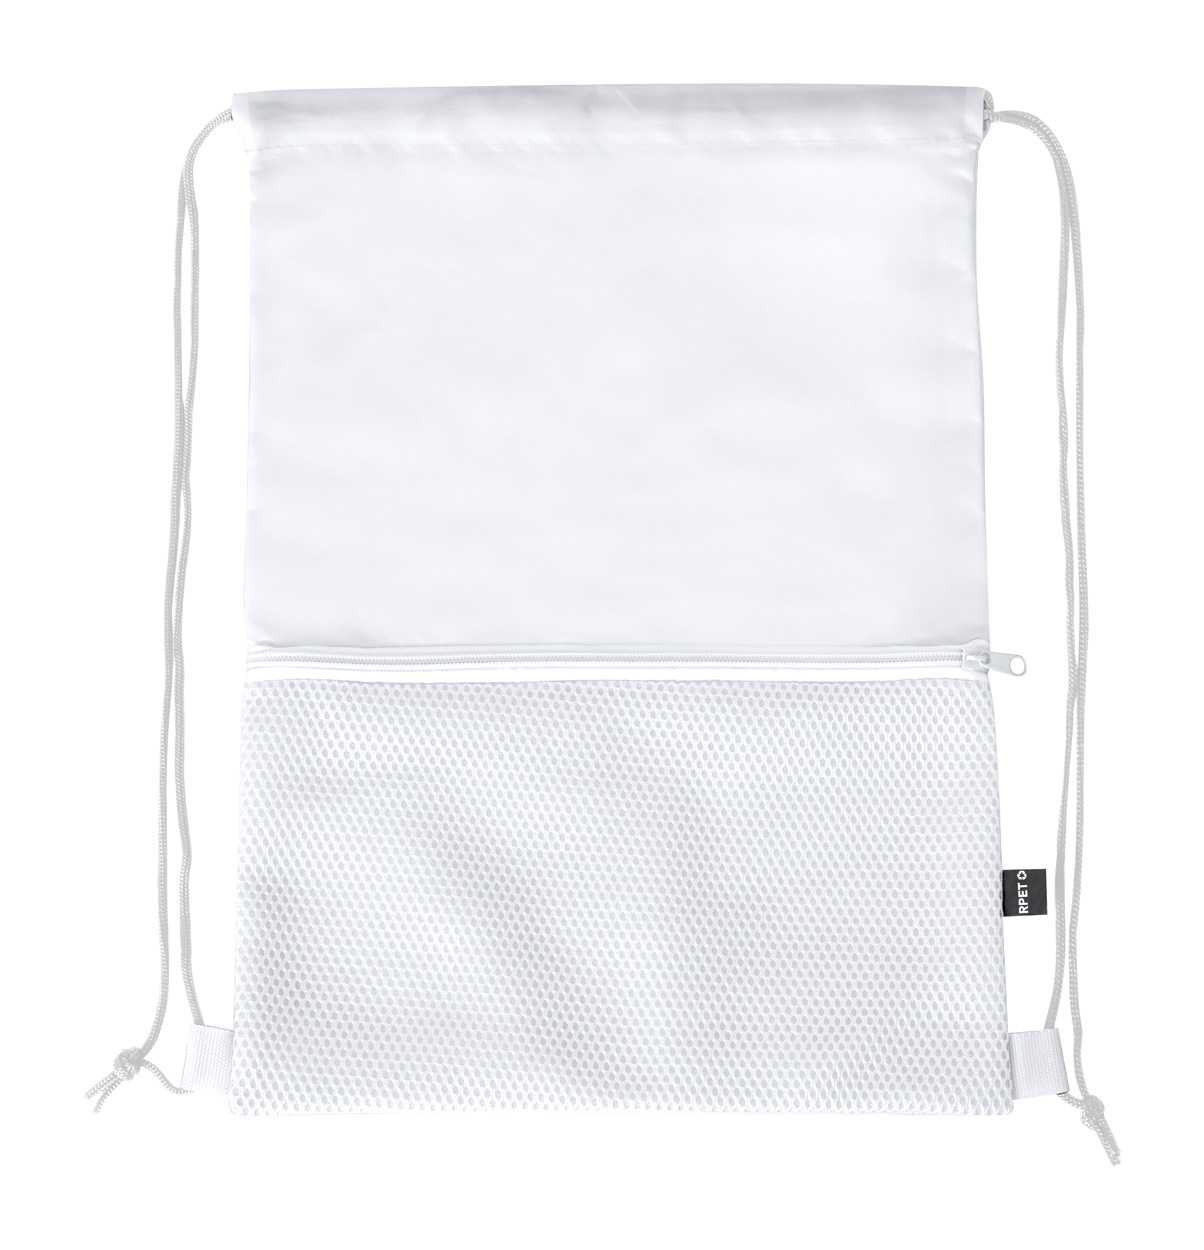 Note the RPET bag for download - white